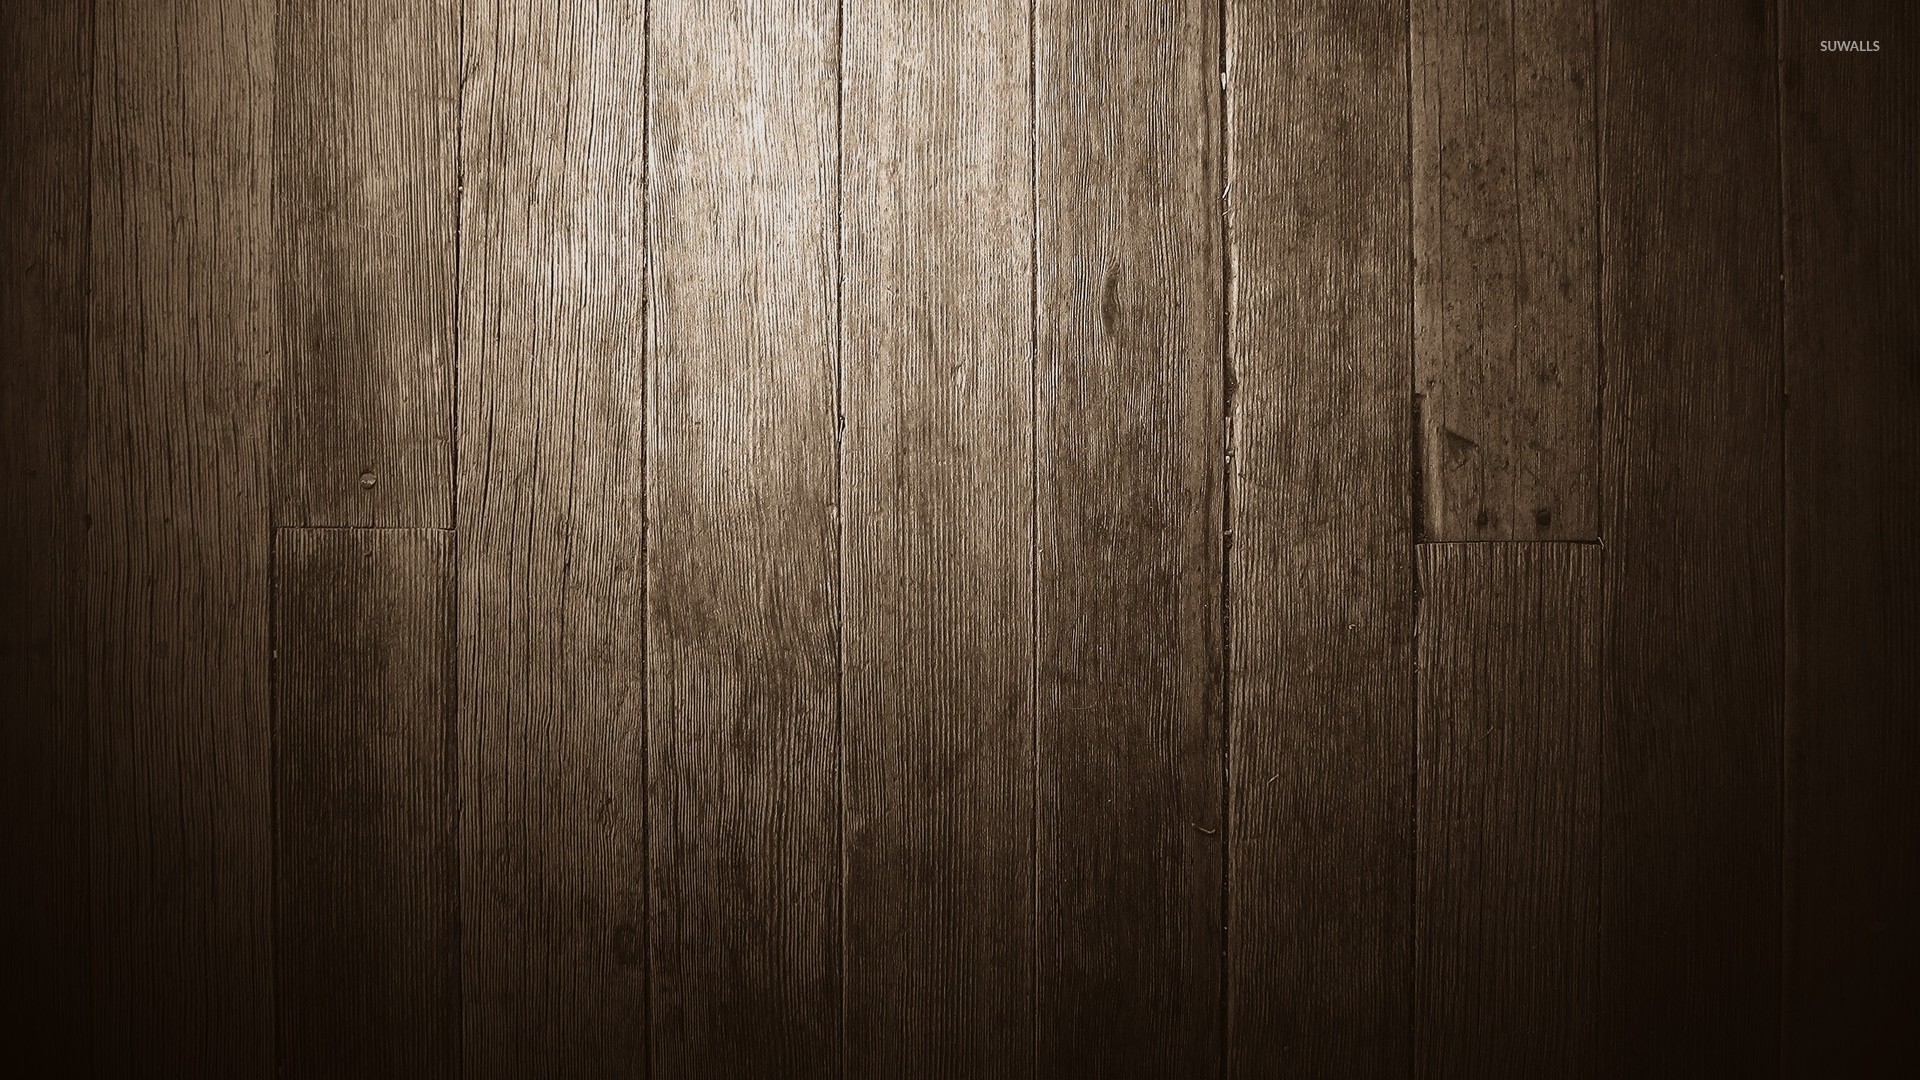 Wood panels wallpaper - Photography wallpapers - #26745